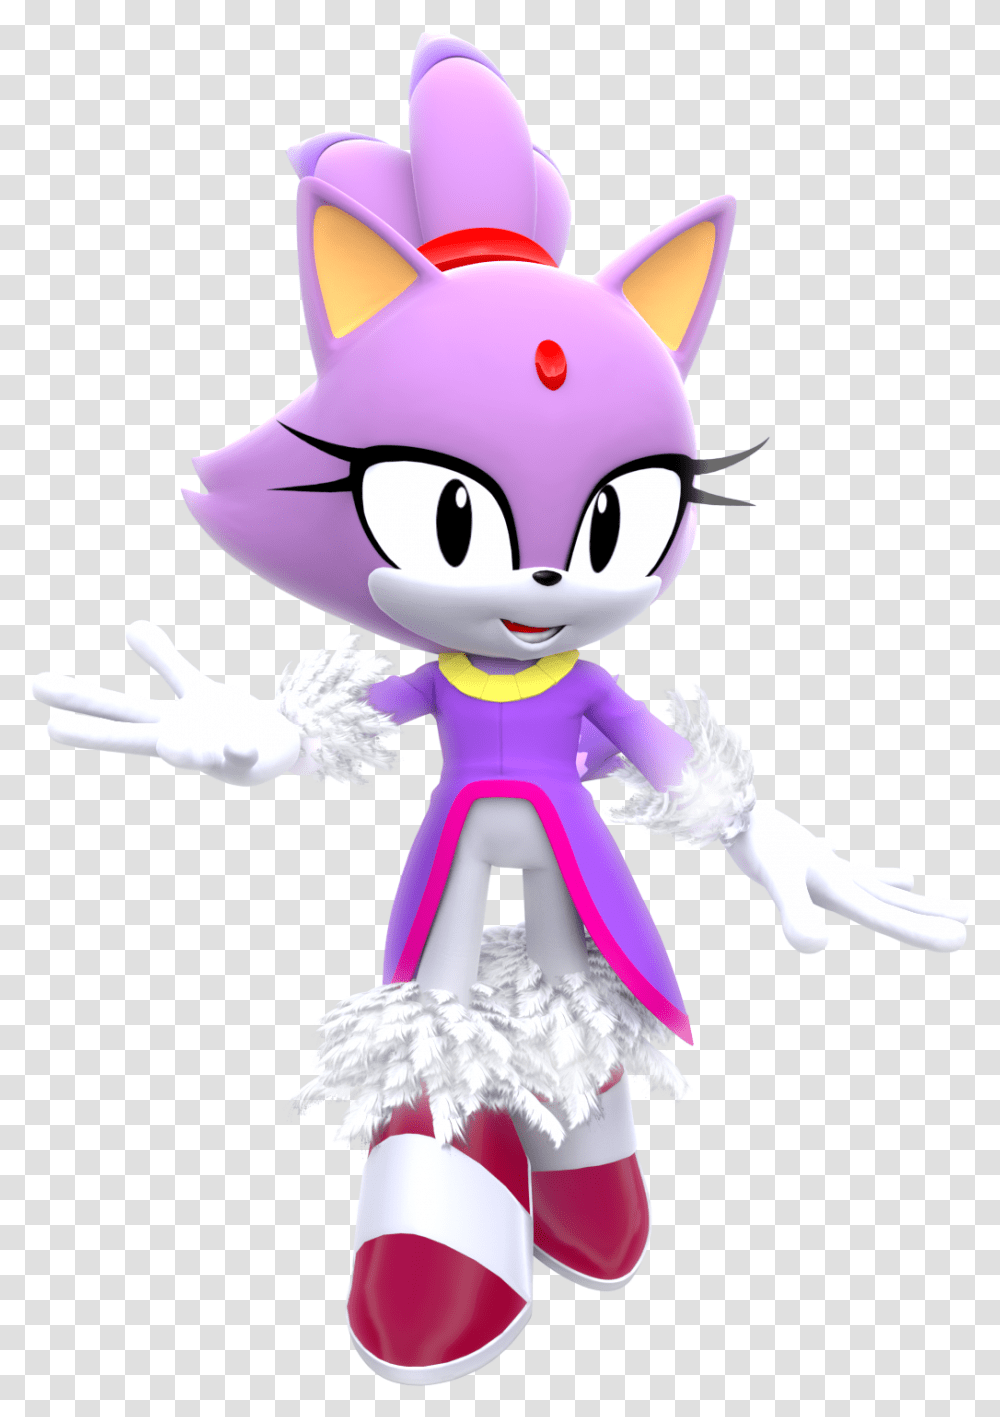 Best Blaze The Cat Wallpaper On Hipwallpaper Awesome Classic Sonic The Hedgehog Blaze, Toy, Performer, Figurine, Mascot Transparent Png